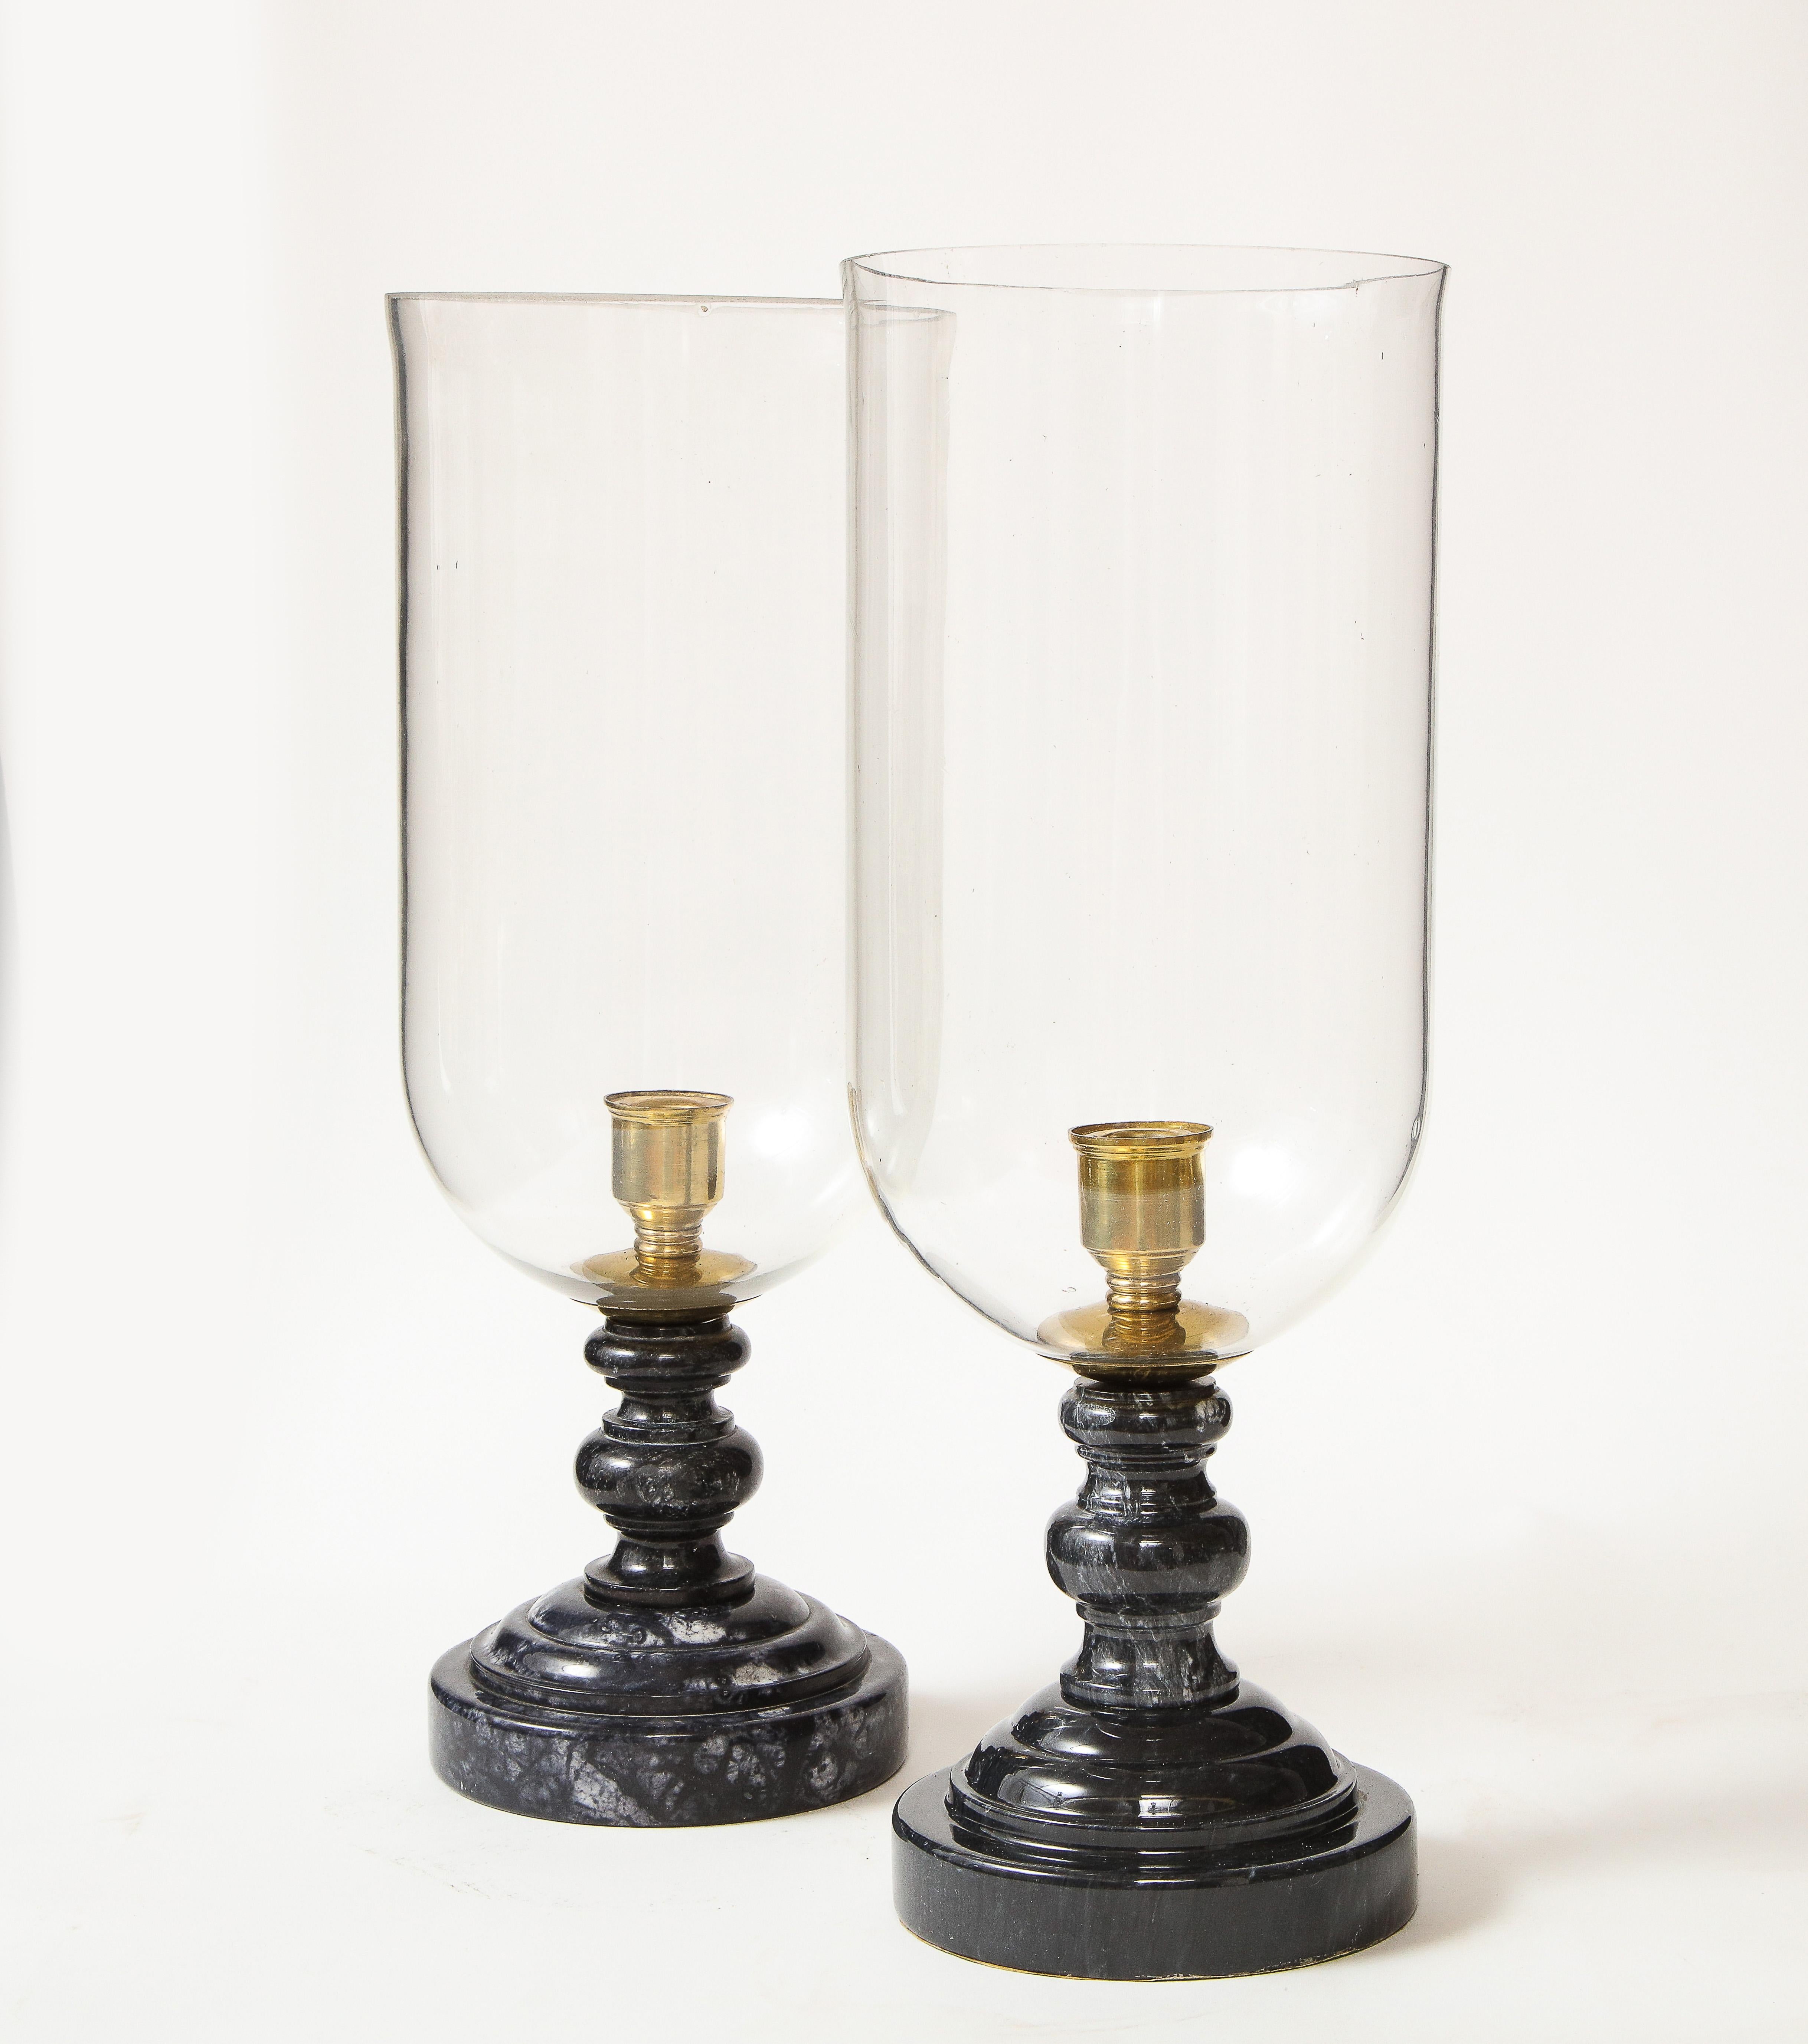 Each with a glass hurricane shade and rounded turned base of black marble with white veining.